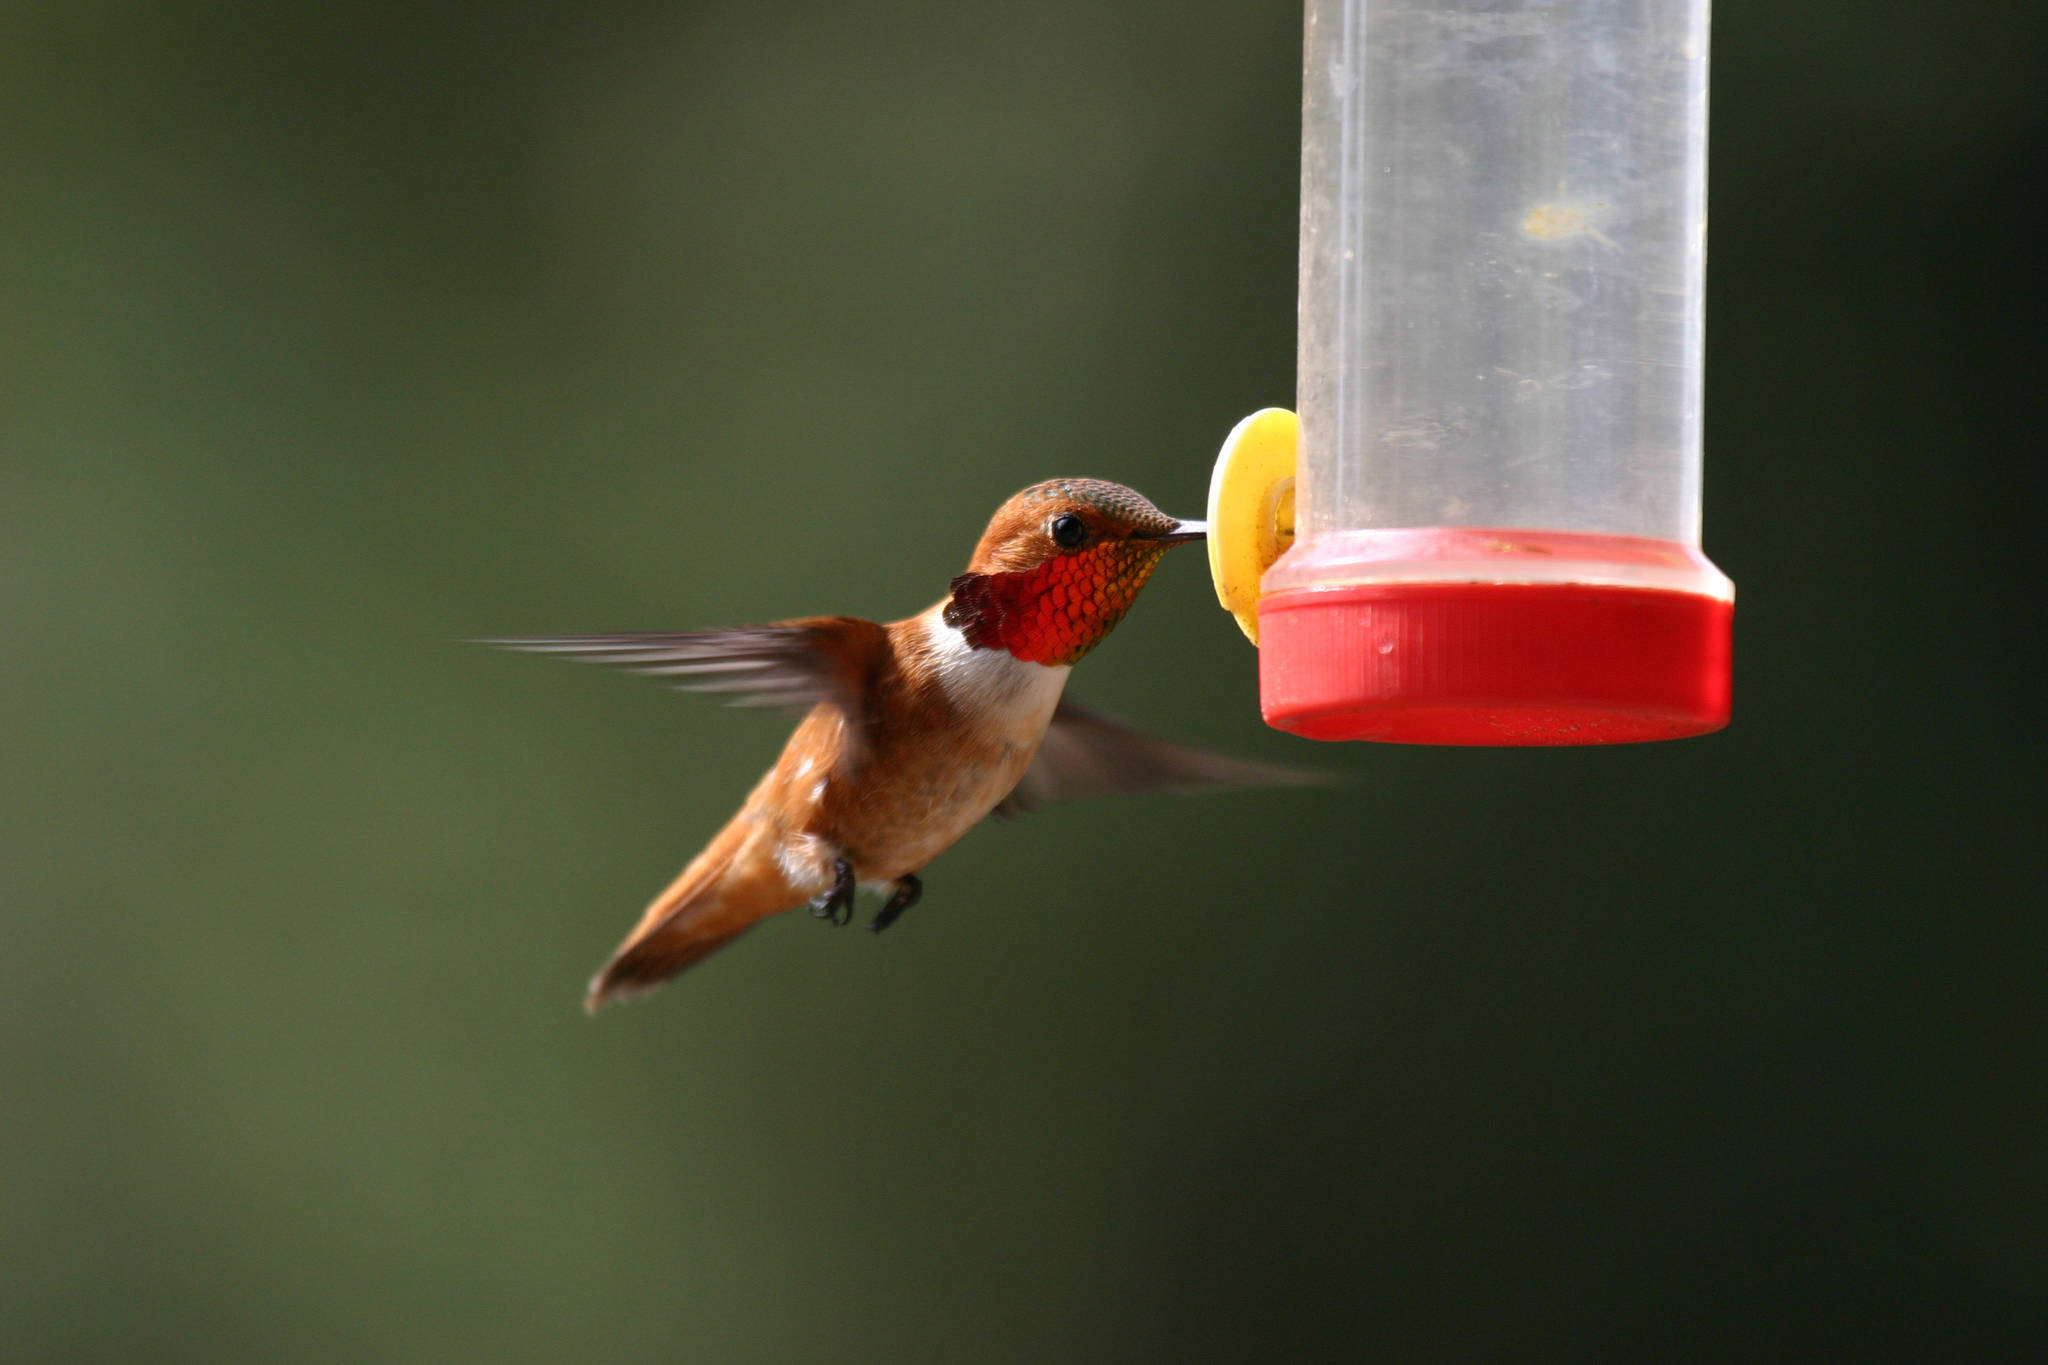 A rufous hummingbird sips nectar from a feeder in this undated photograph. (Photo by Carla Stanley)